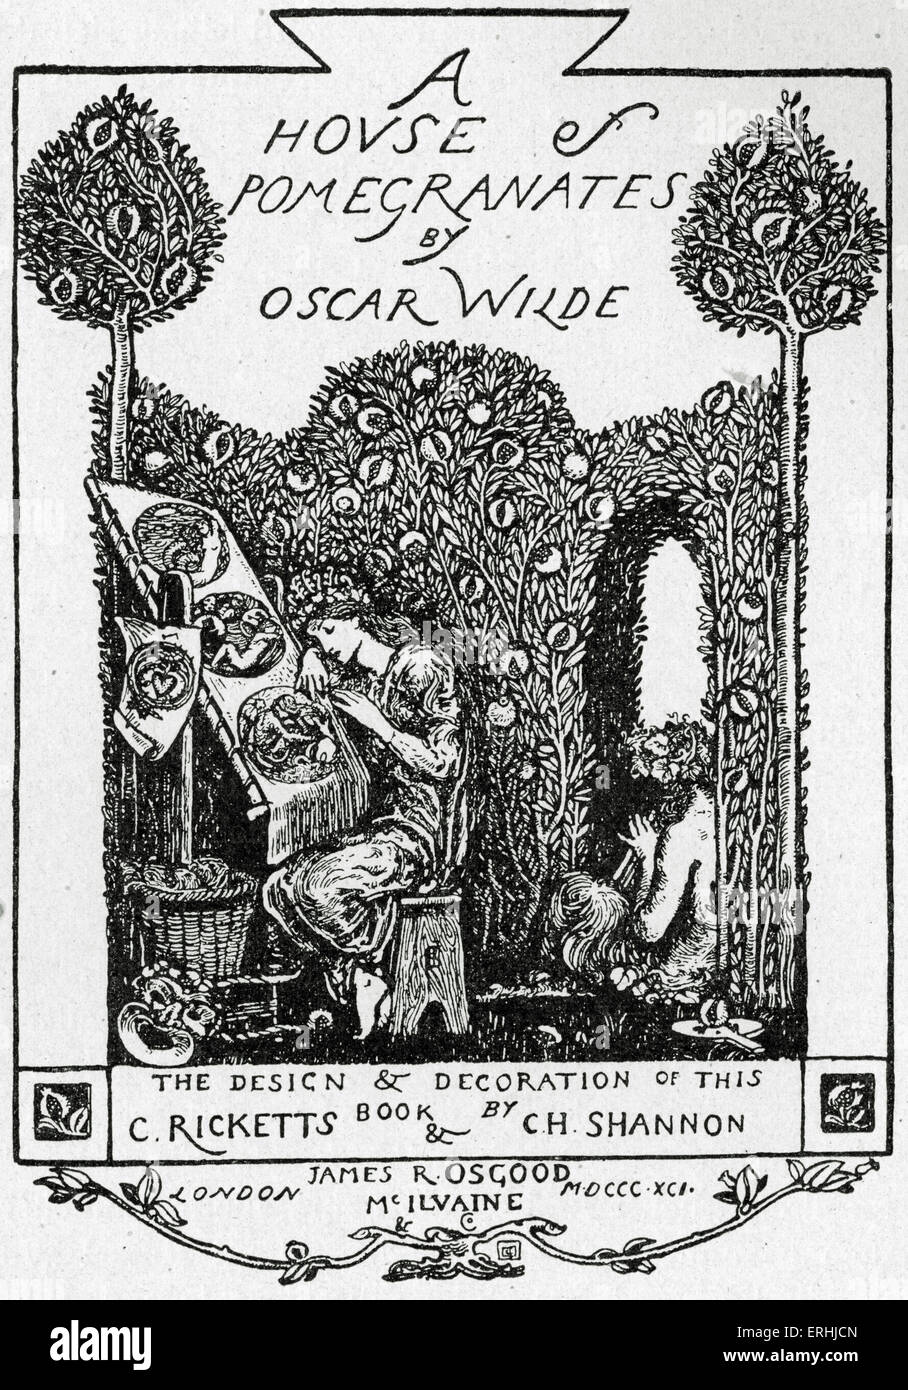 Oscar Wilde - Cover of the Anglo-Irish playwright, novelist and poet's collection of fairy tales, 'A House of Pomegranates', Stock Photo